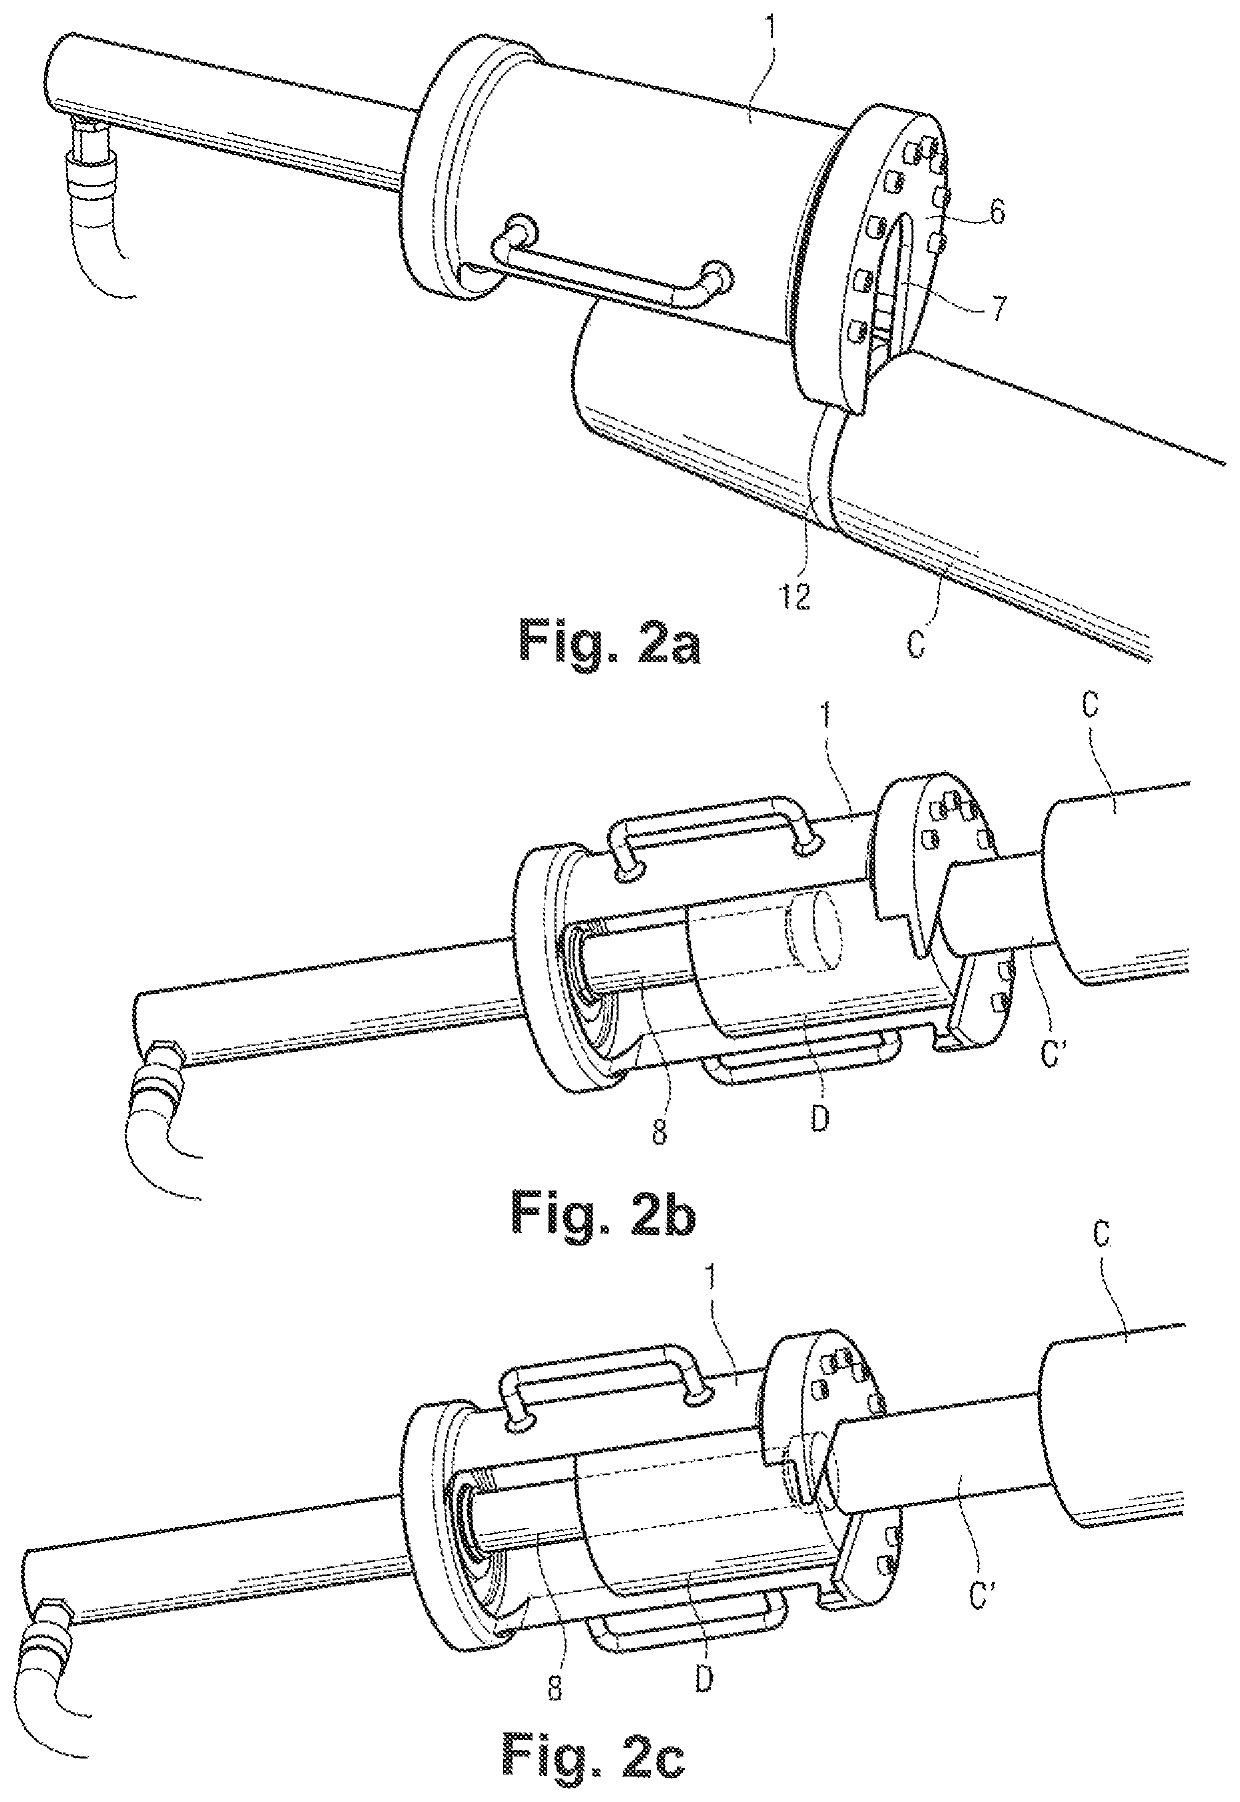 Cable stripping device